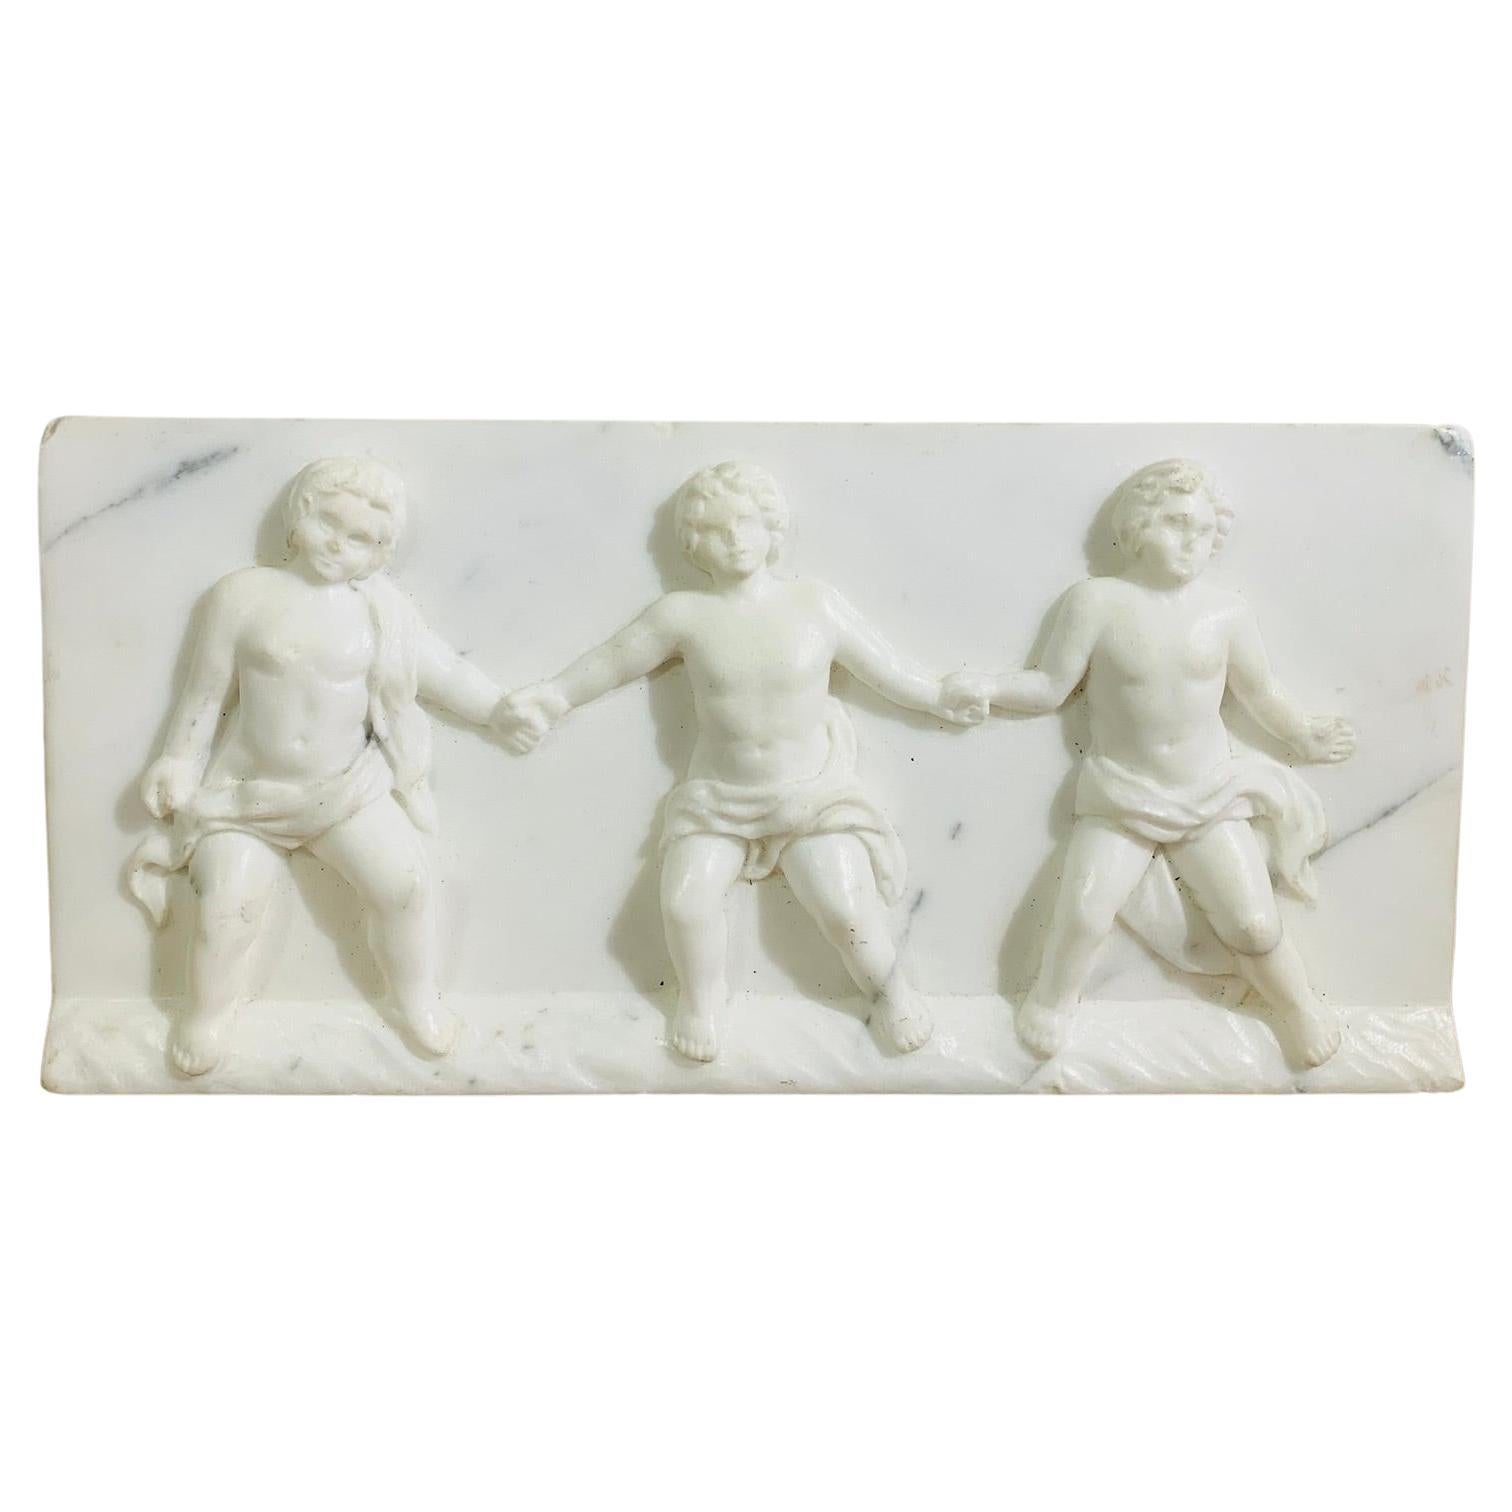 Late 18th Century, Alegory of Friendship, Bas-relief in Carrara Marble